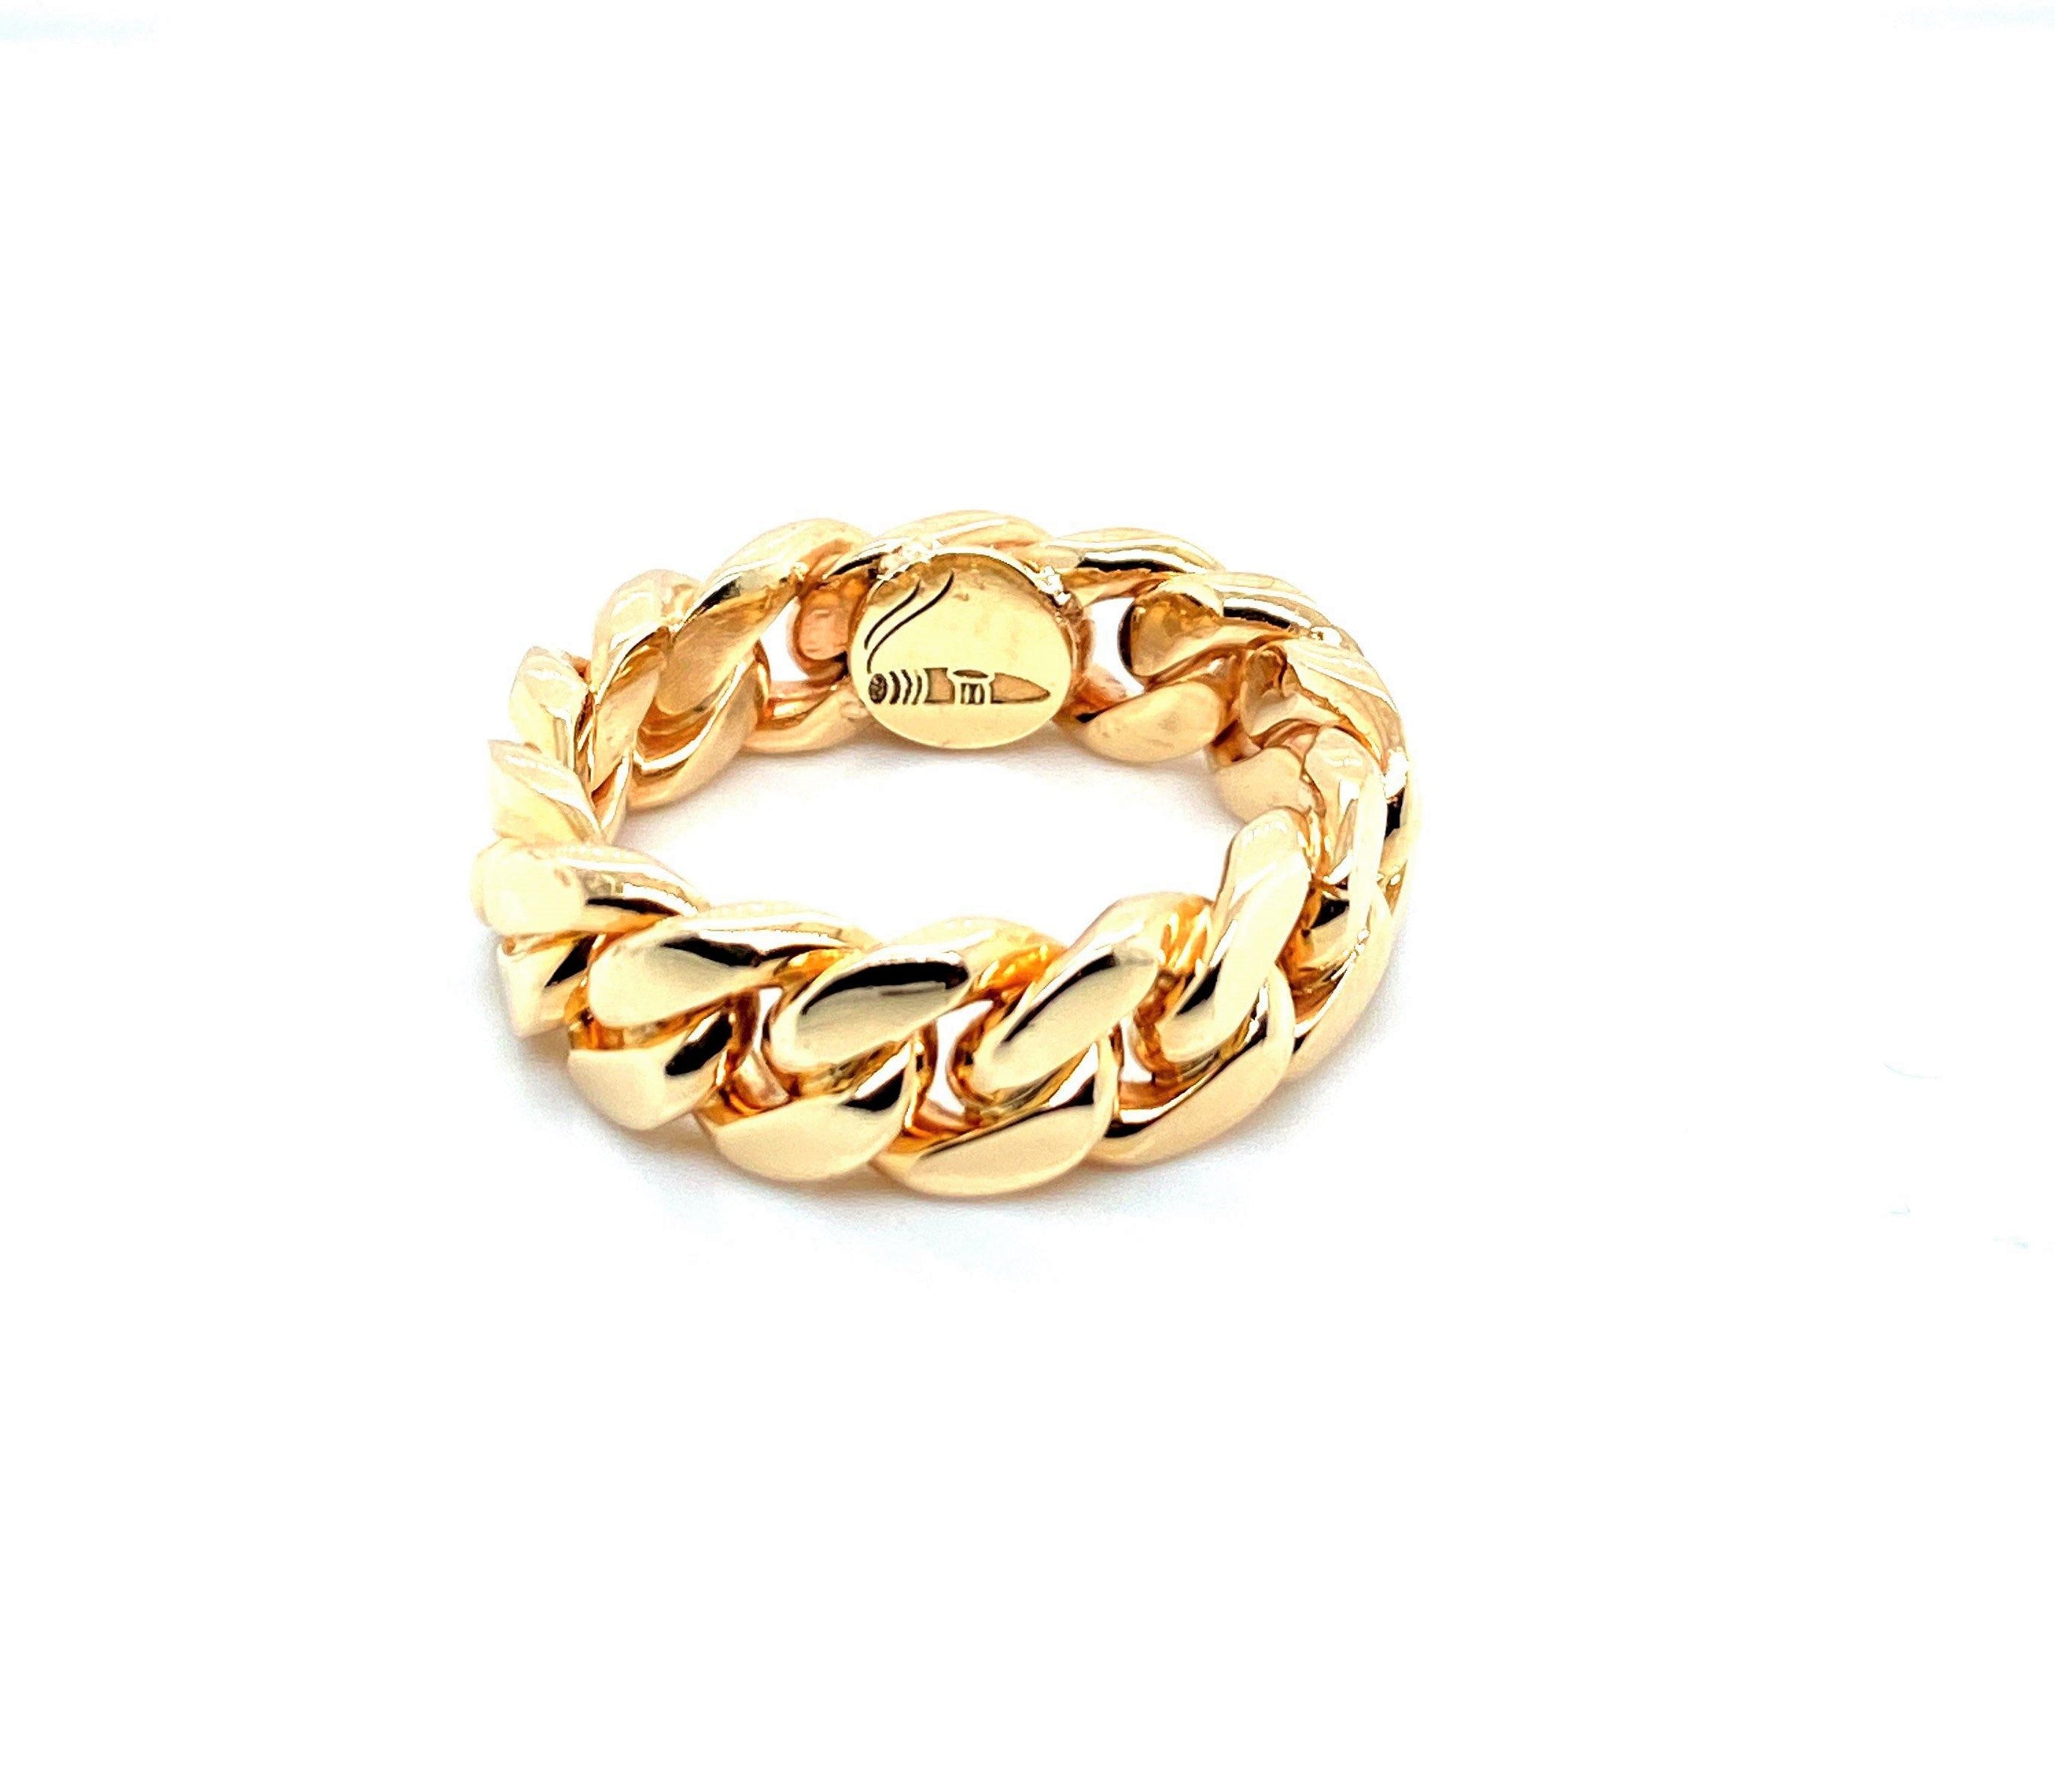 APPELT'S DIAMONDS | 10K SOLID YELLOW GOLD MIAMI CUBAN RING 8MM SIZE 9